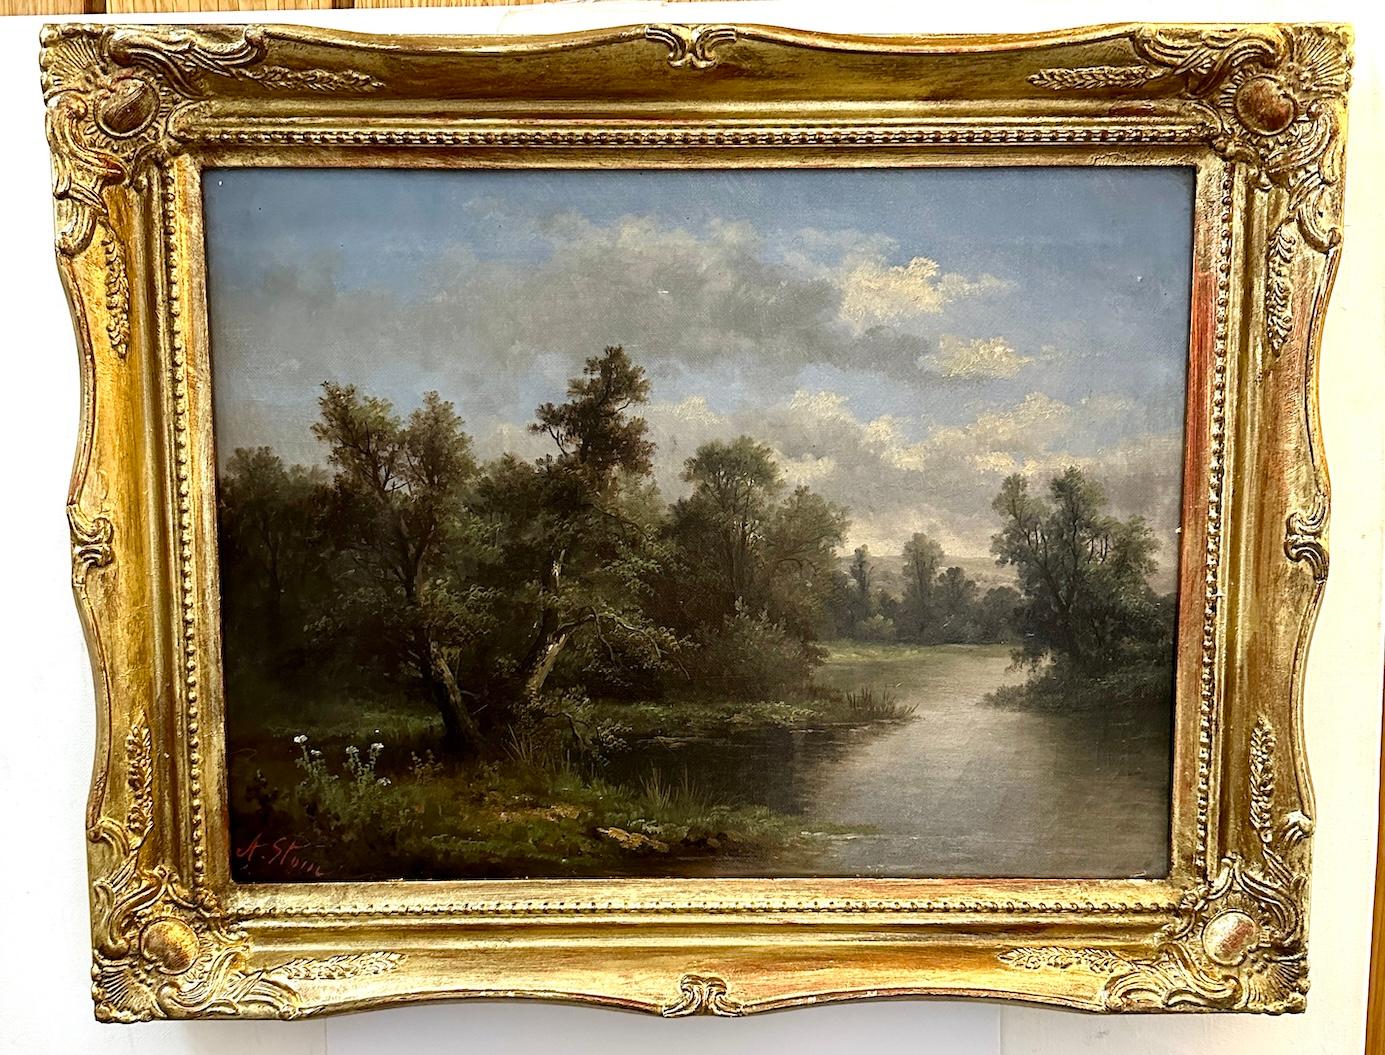 19th century English landscape with Oak and Yew trees on a pathway - Painting by Ada Stone